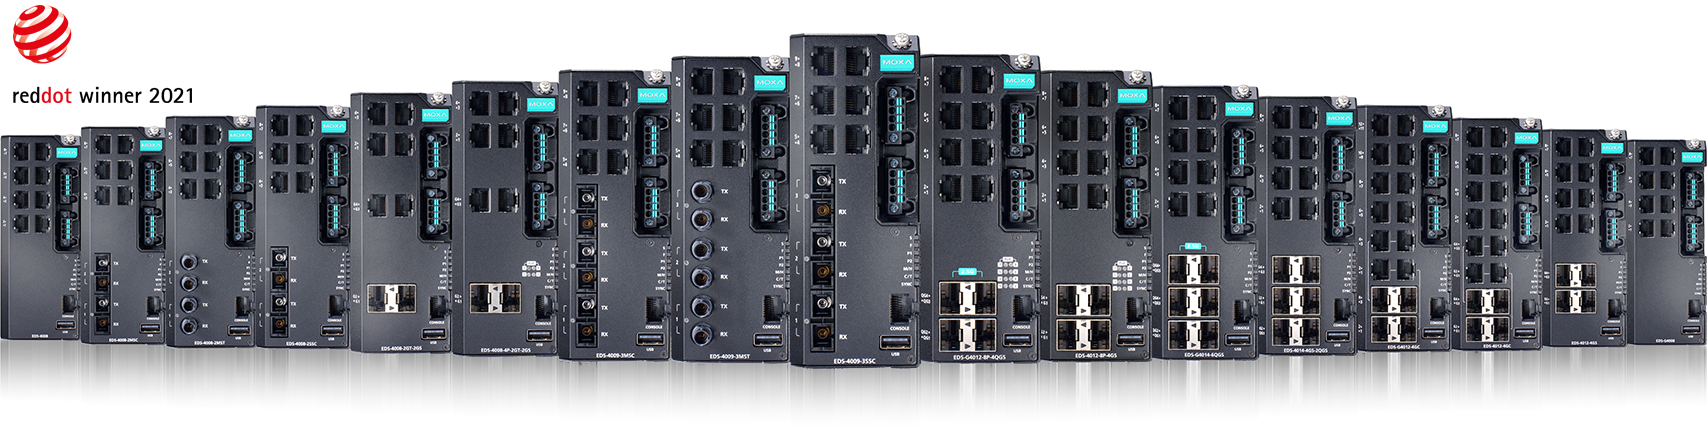 Ethernet Switches - Moxa EDS-4000/G4000